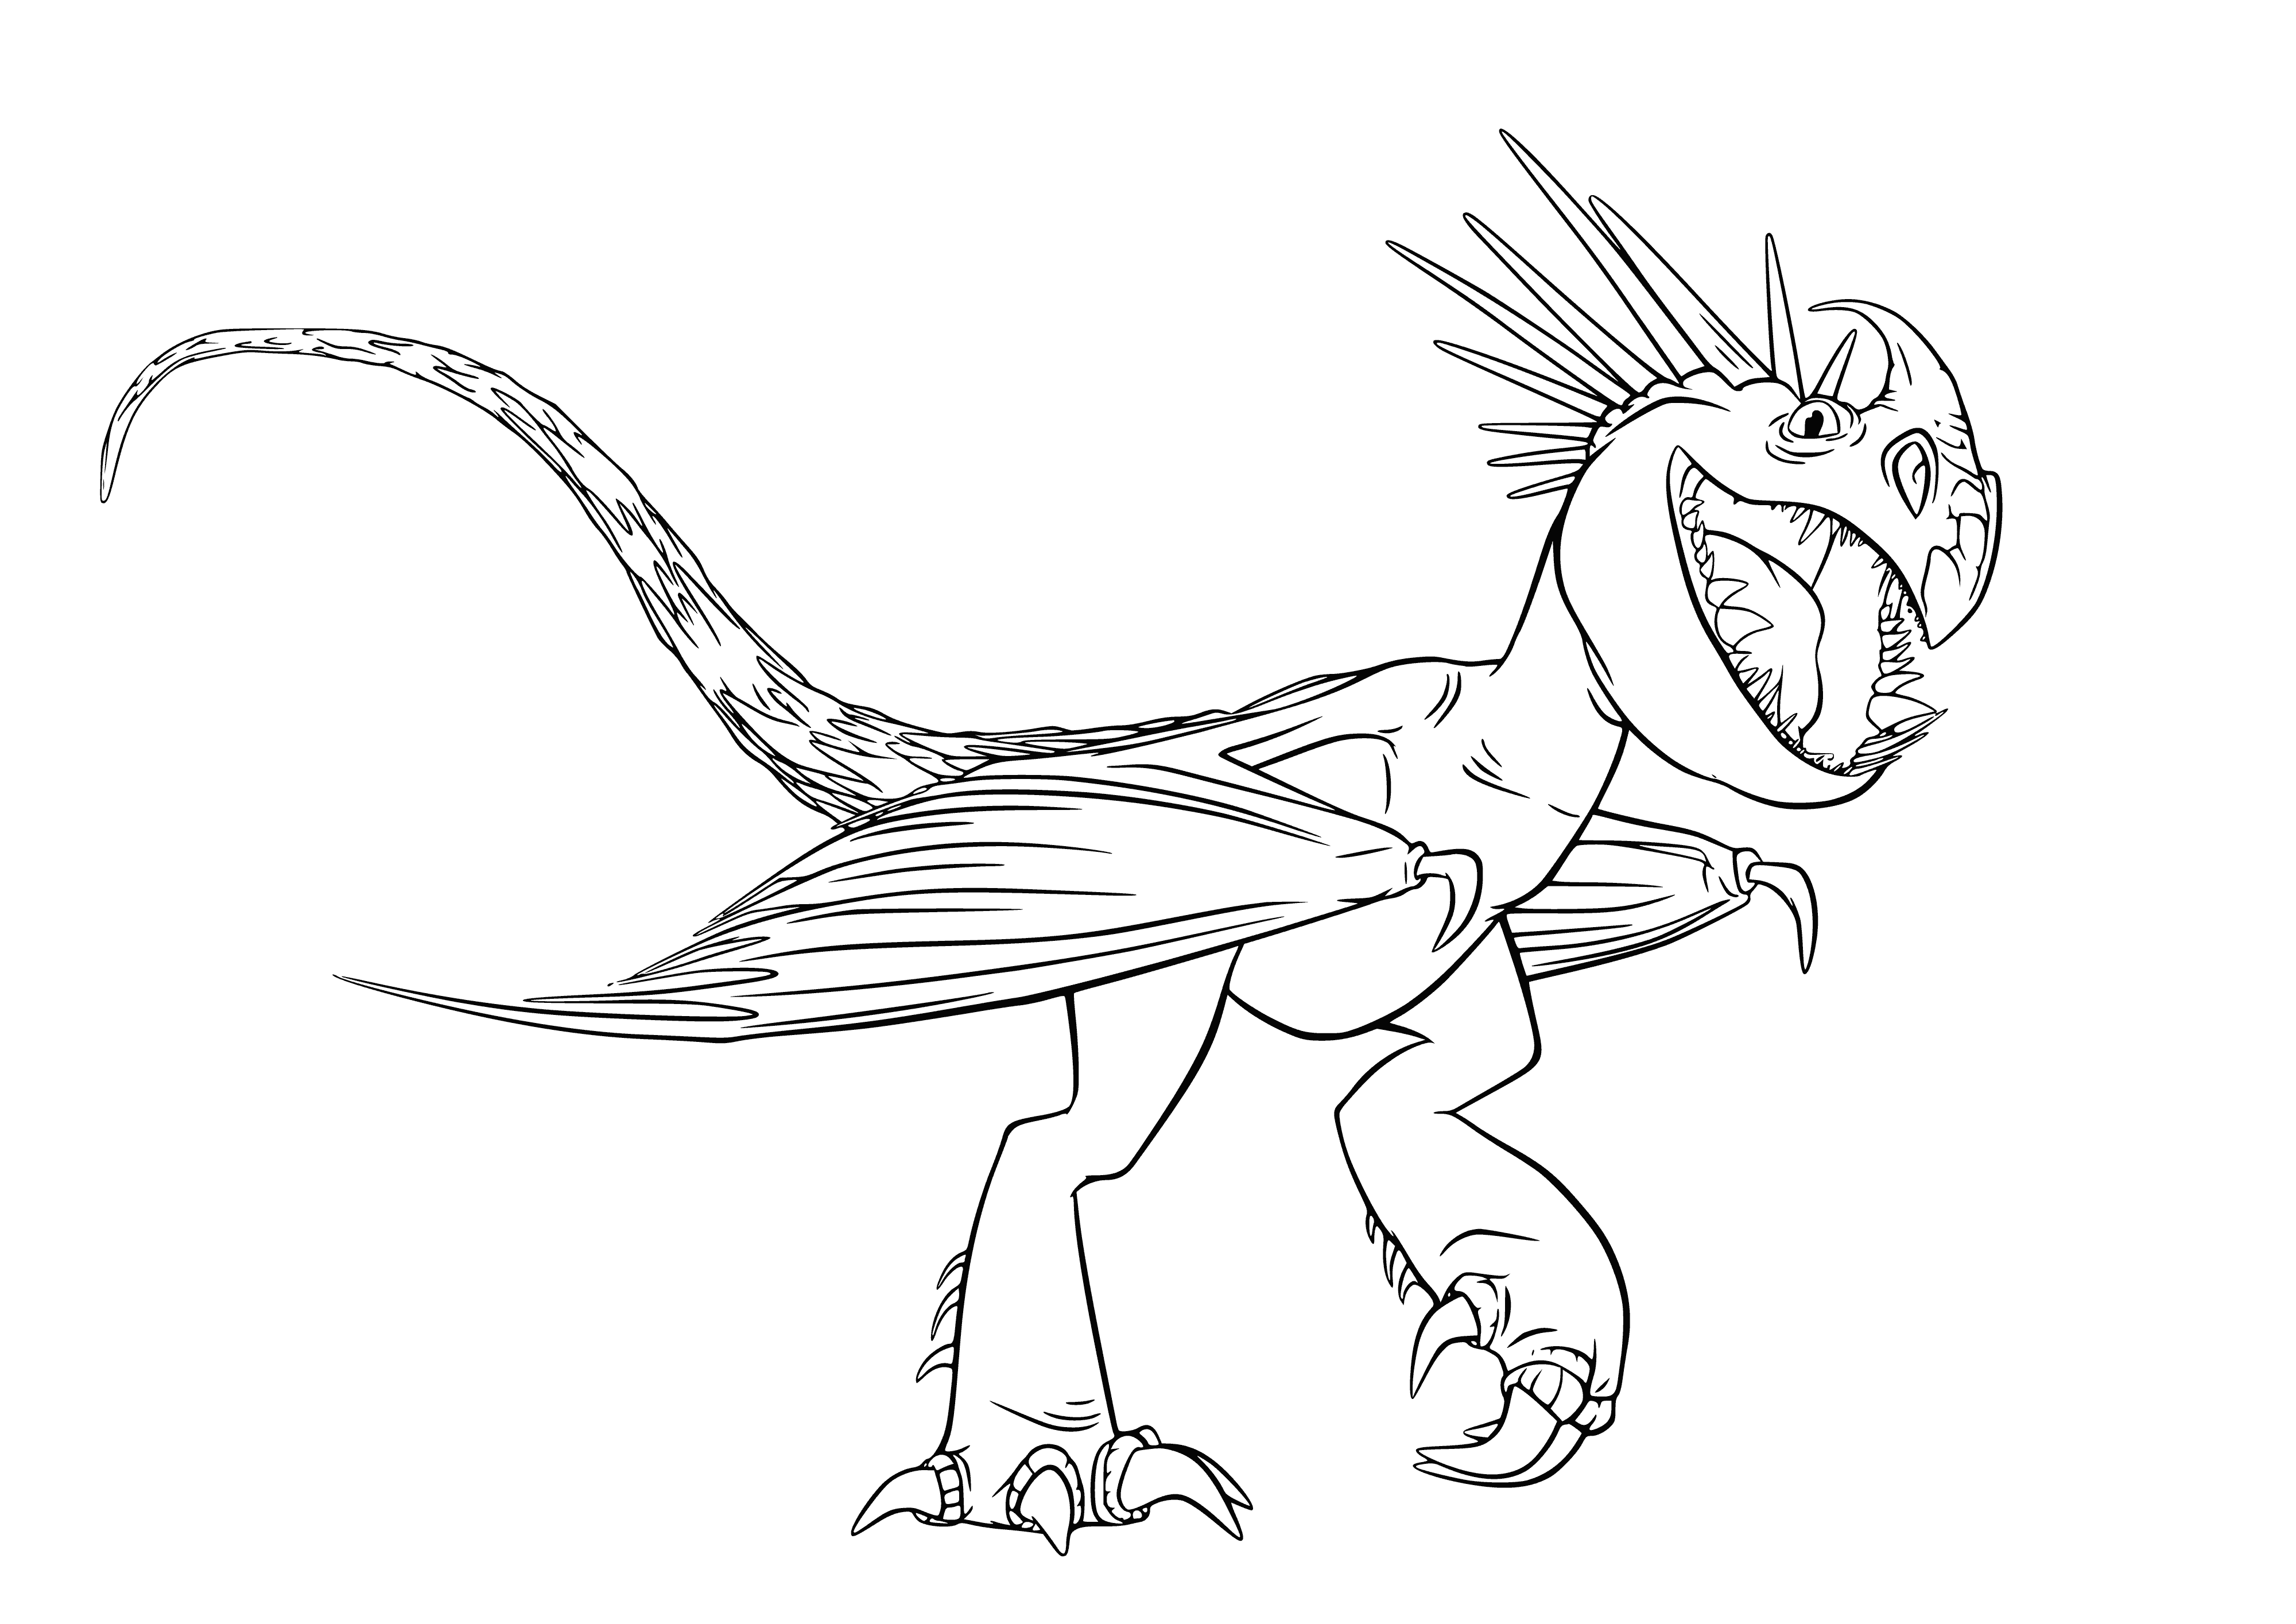 Dragon of Thunderguild coloring page